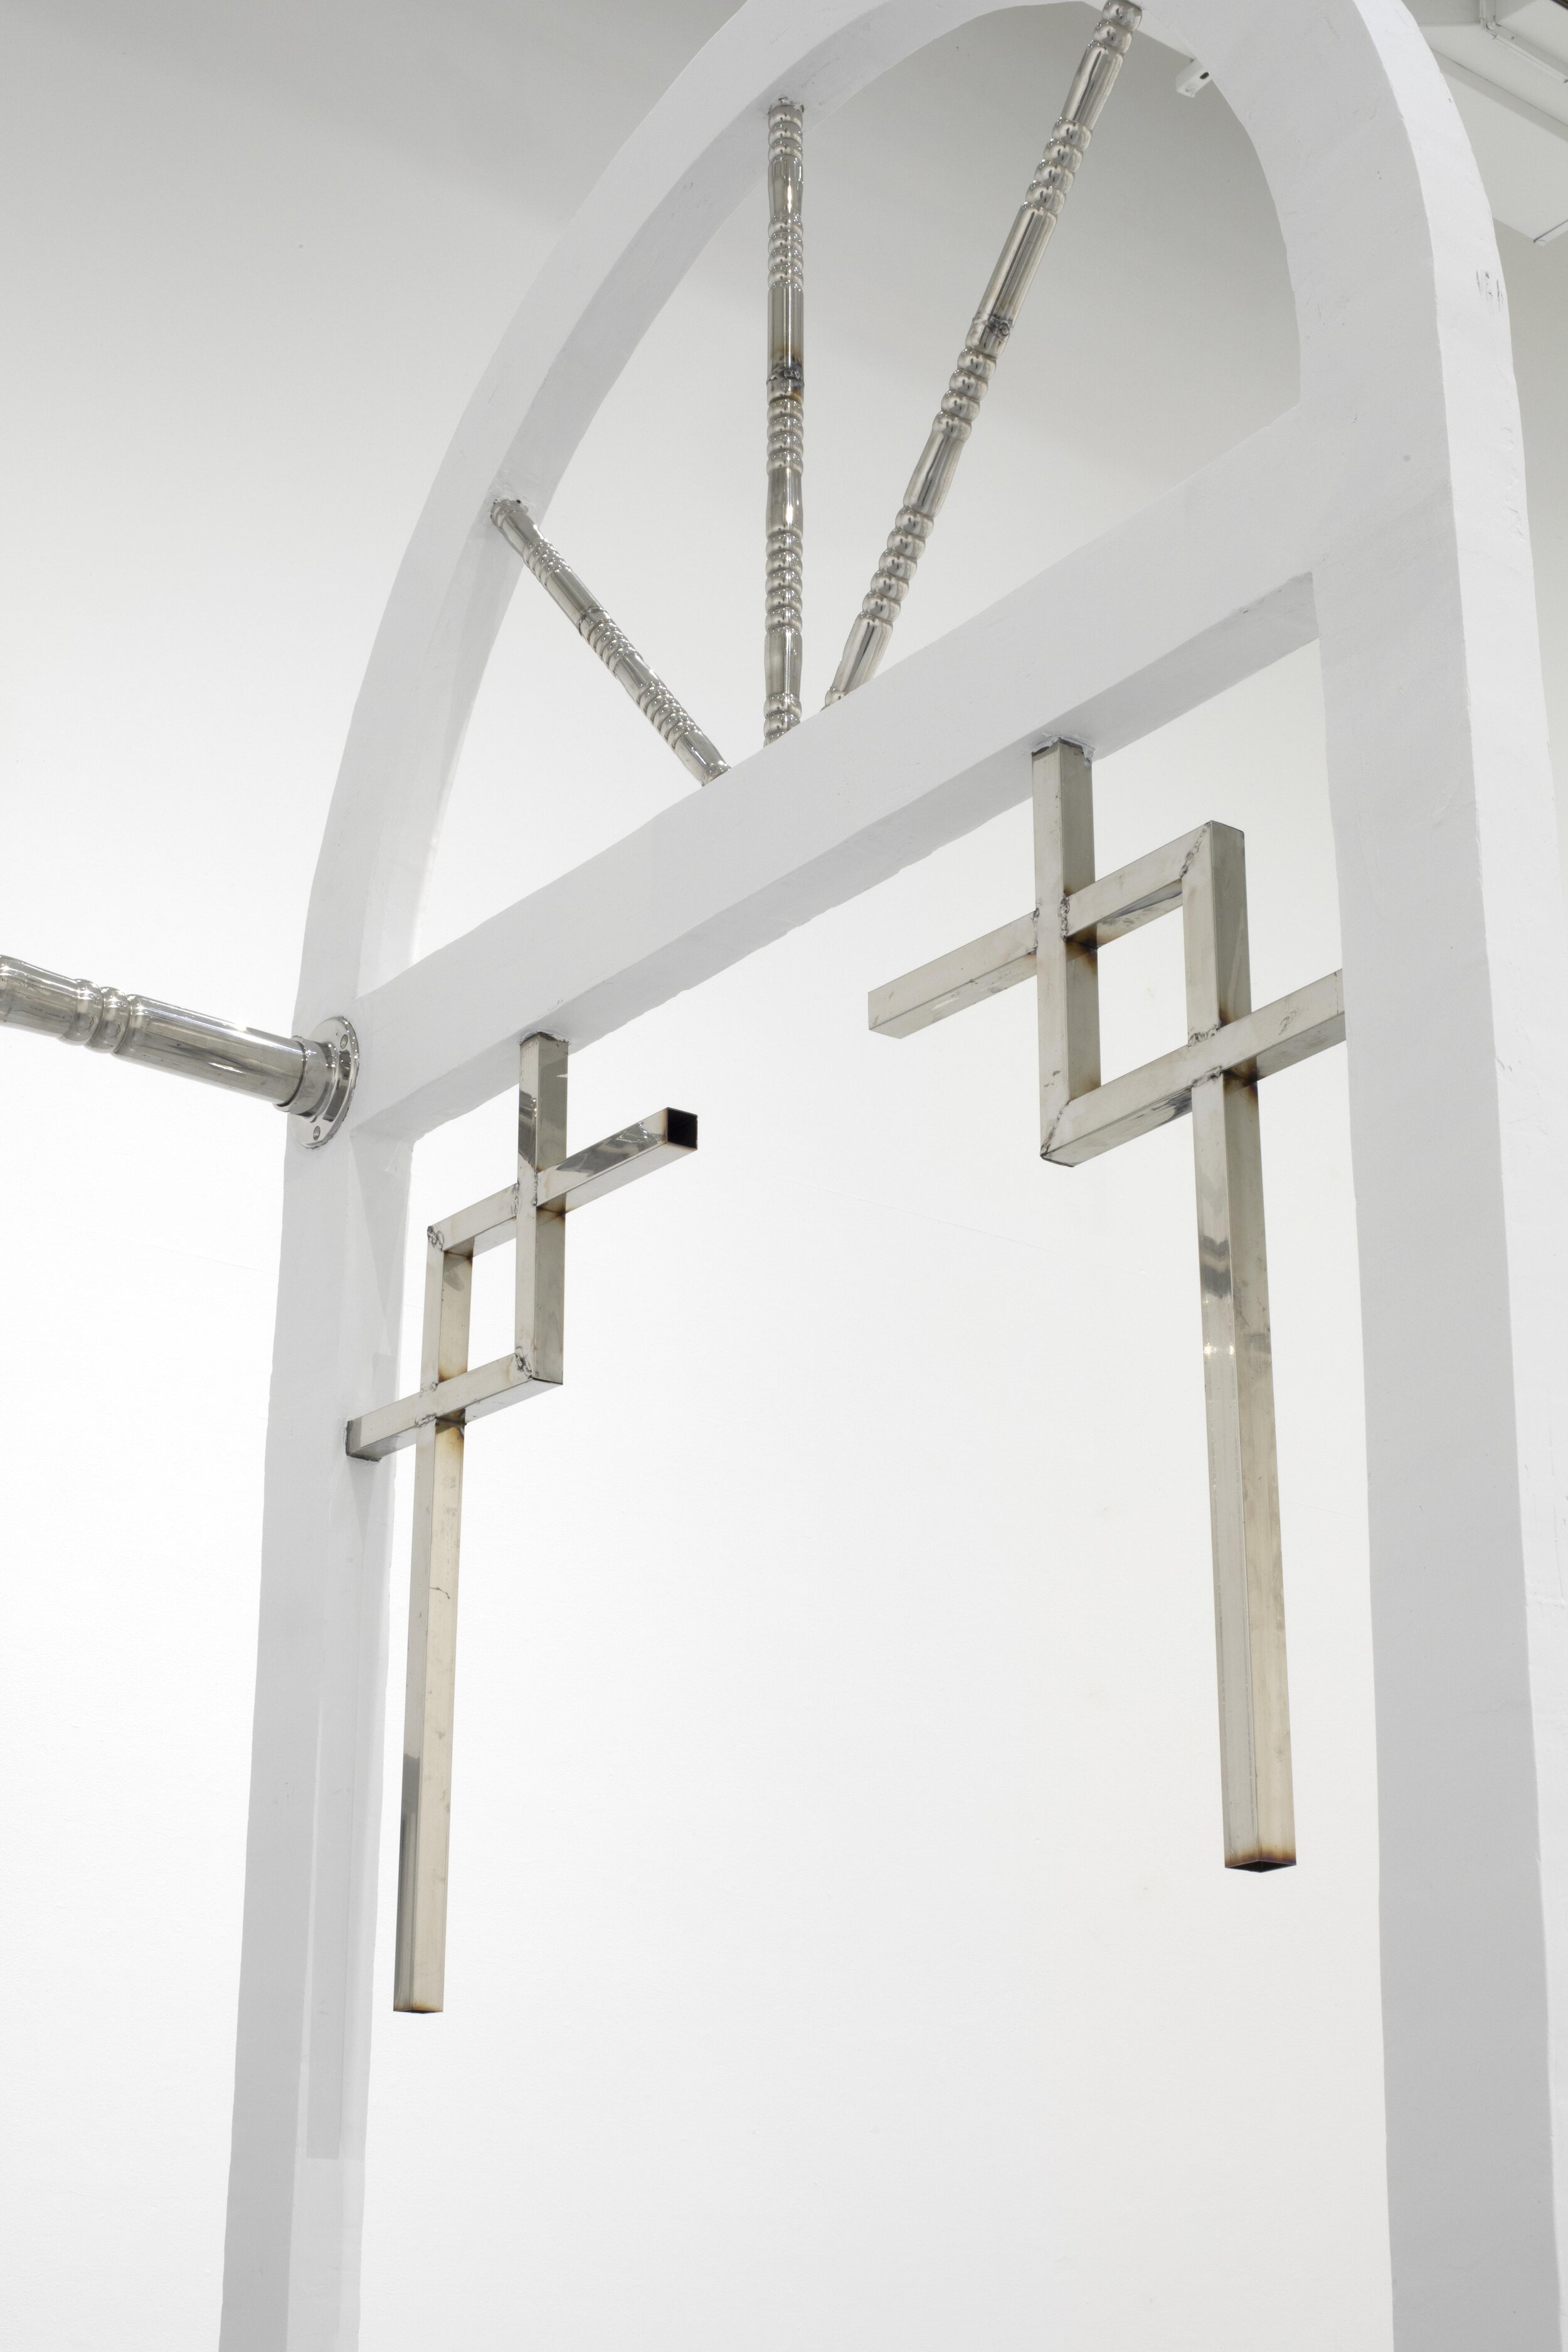  Anne Wu  Once Forgotten, Twice Remembered (One End to the Other, or Two Beginnings)  , 2020 (detail) Stainless steel, polystyrene, joint compound, plaster, paint, MyLand incense container caps 120 x 36 x 96 (305 x 91 x 244 cm) photo by Sol Avi Erez 